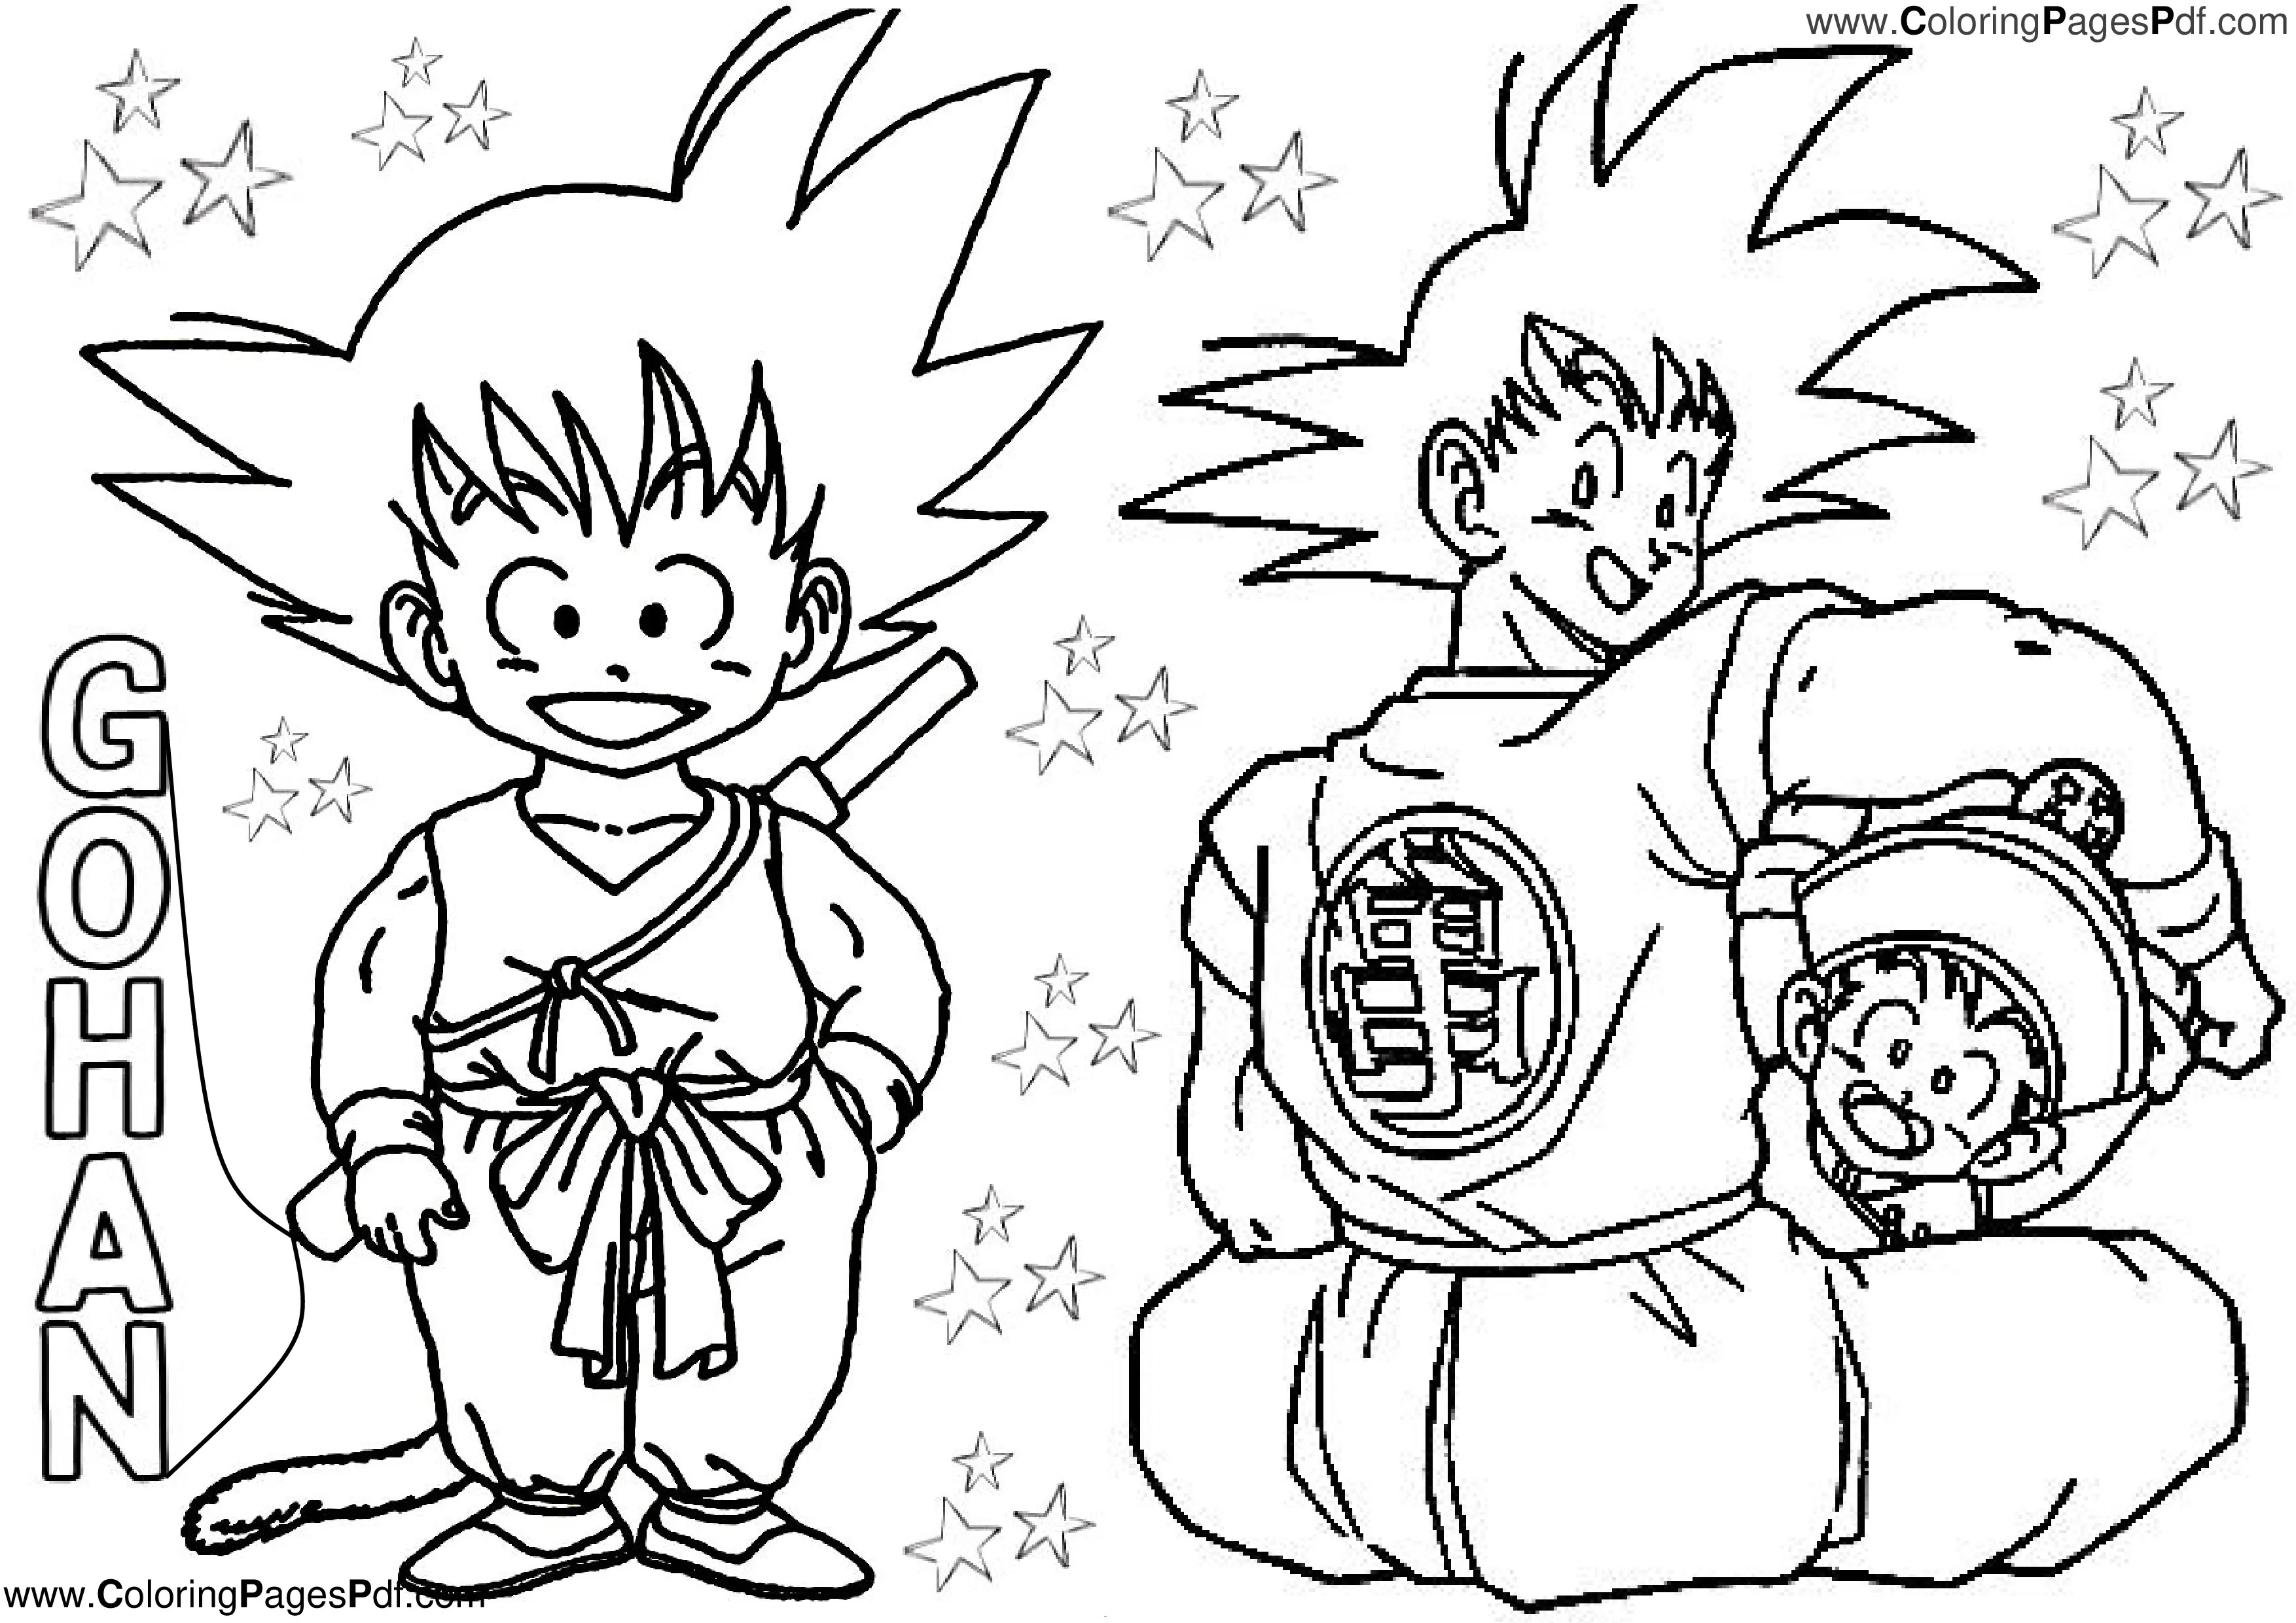 Dragon ball z coloring pages gohan